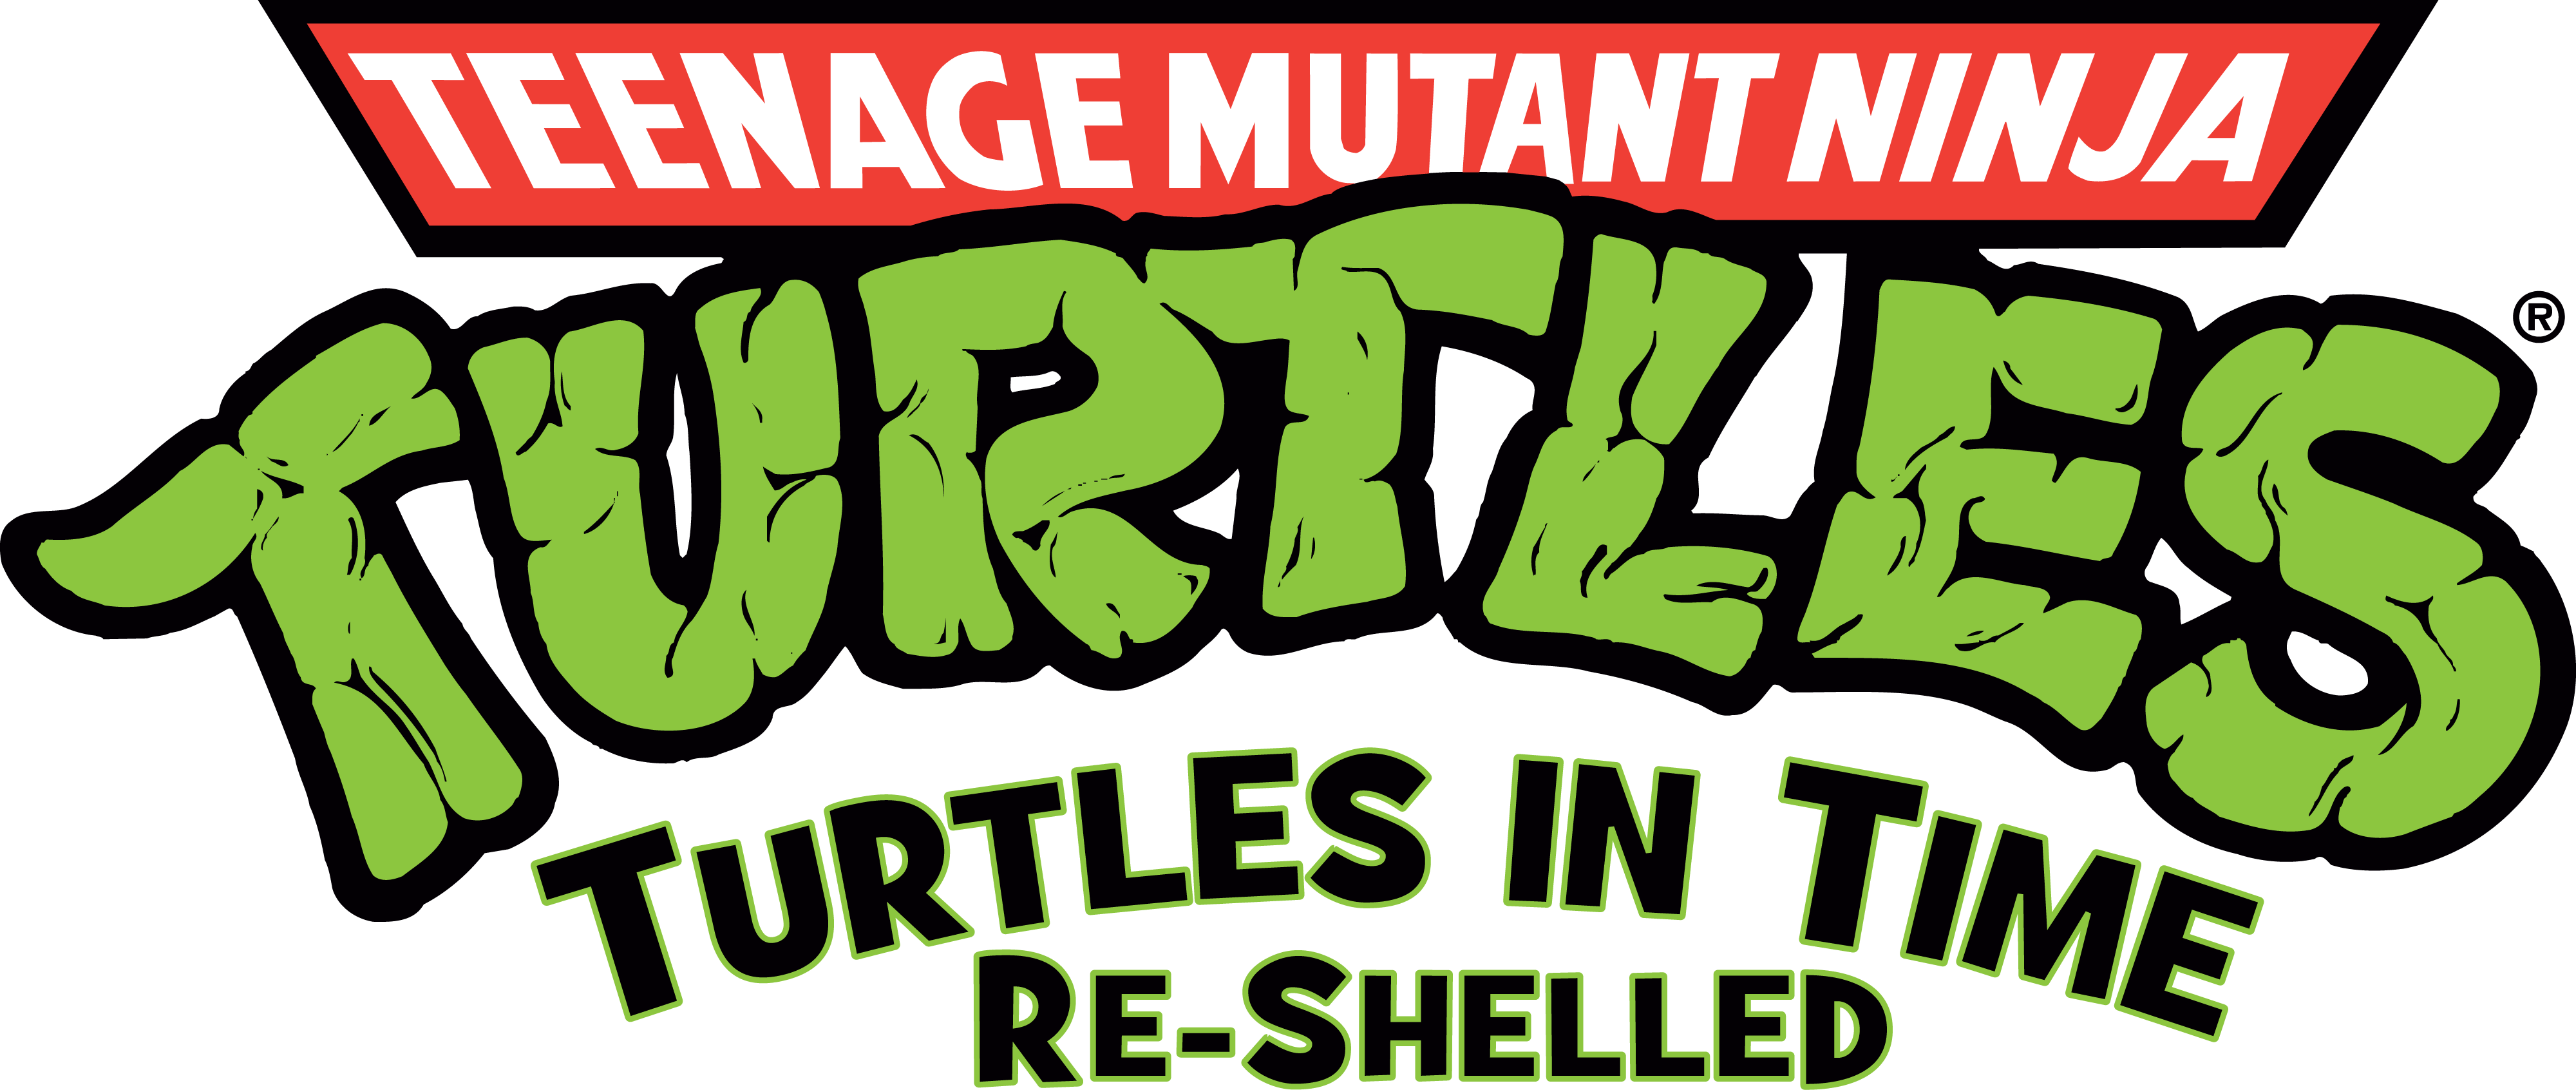 Turtles in time. Turtles надпись. Черепашки ниндзя надпись. Черепашки ниндзя логотип. Turtles in time re-shelled.